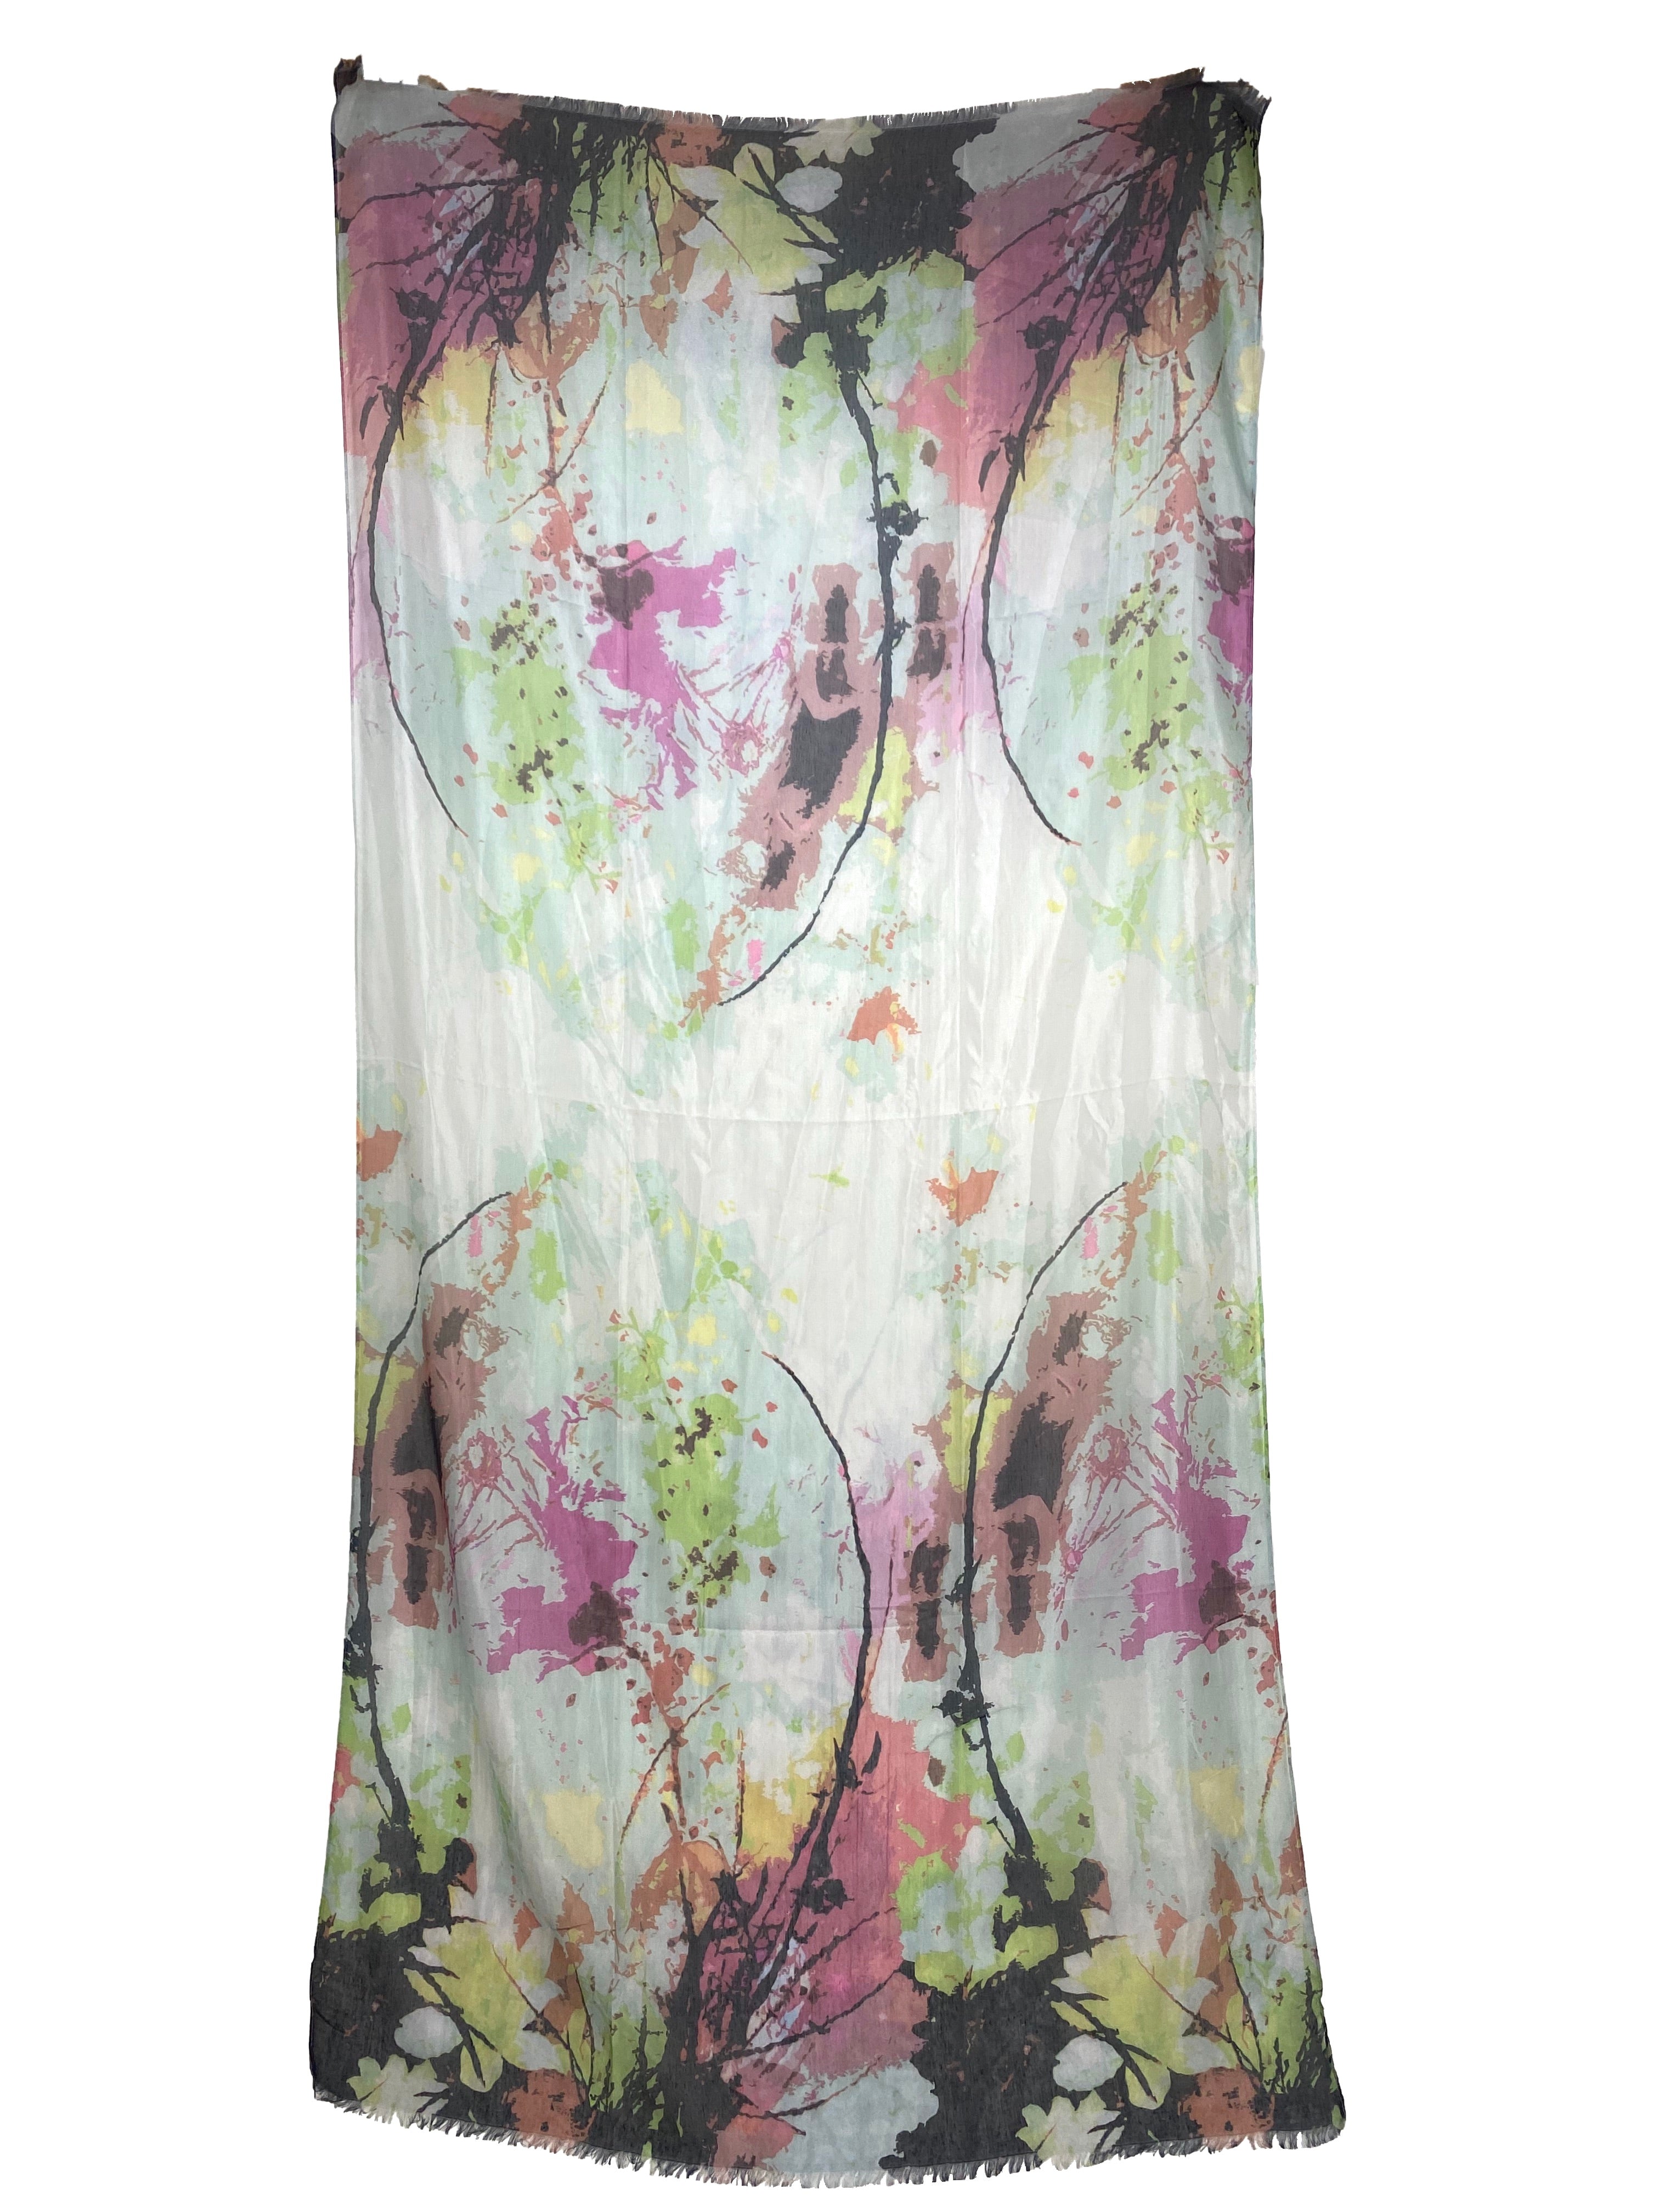 Floral Watercolor Scarf - Soft Mint Grey    